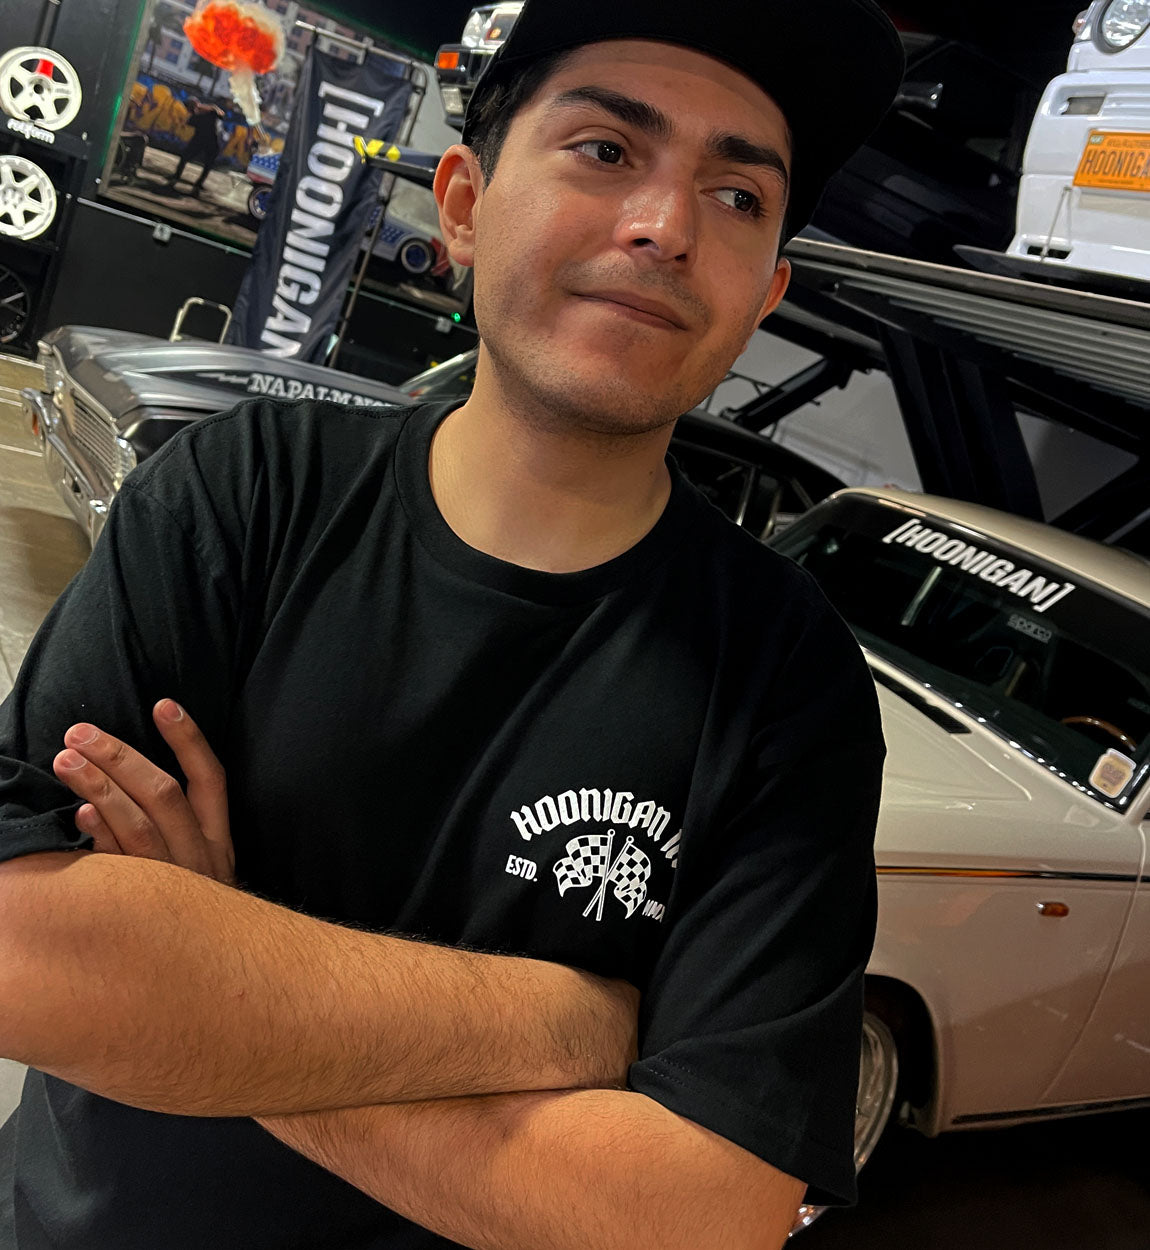 Our man Isaac showing off the HOONIGAN PCCC short sleeve T-shirt